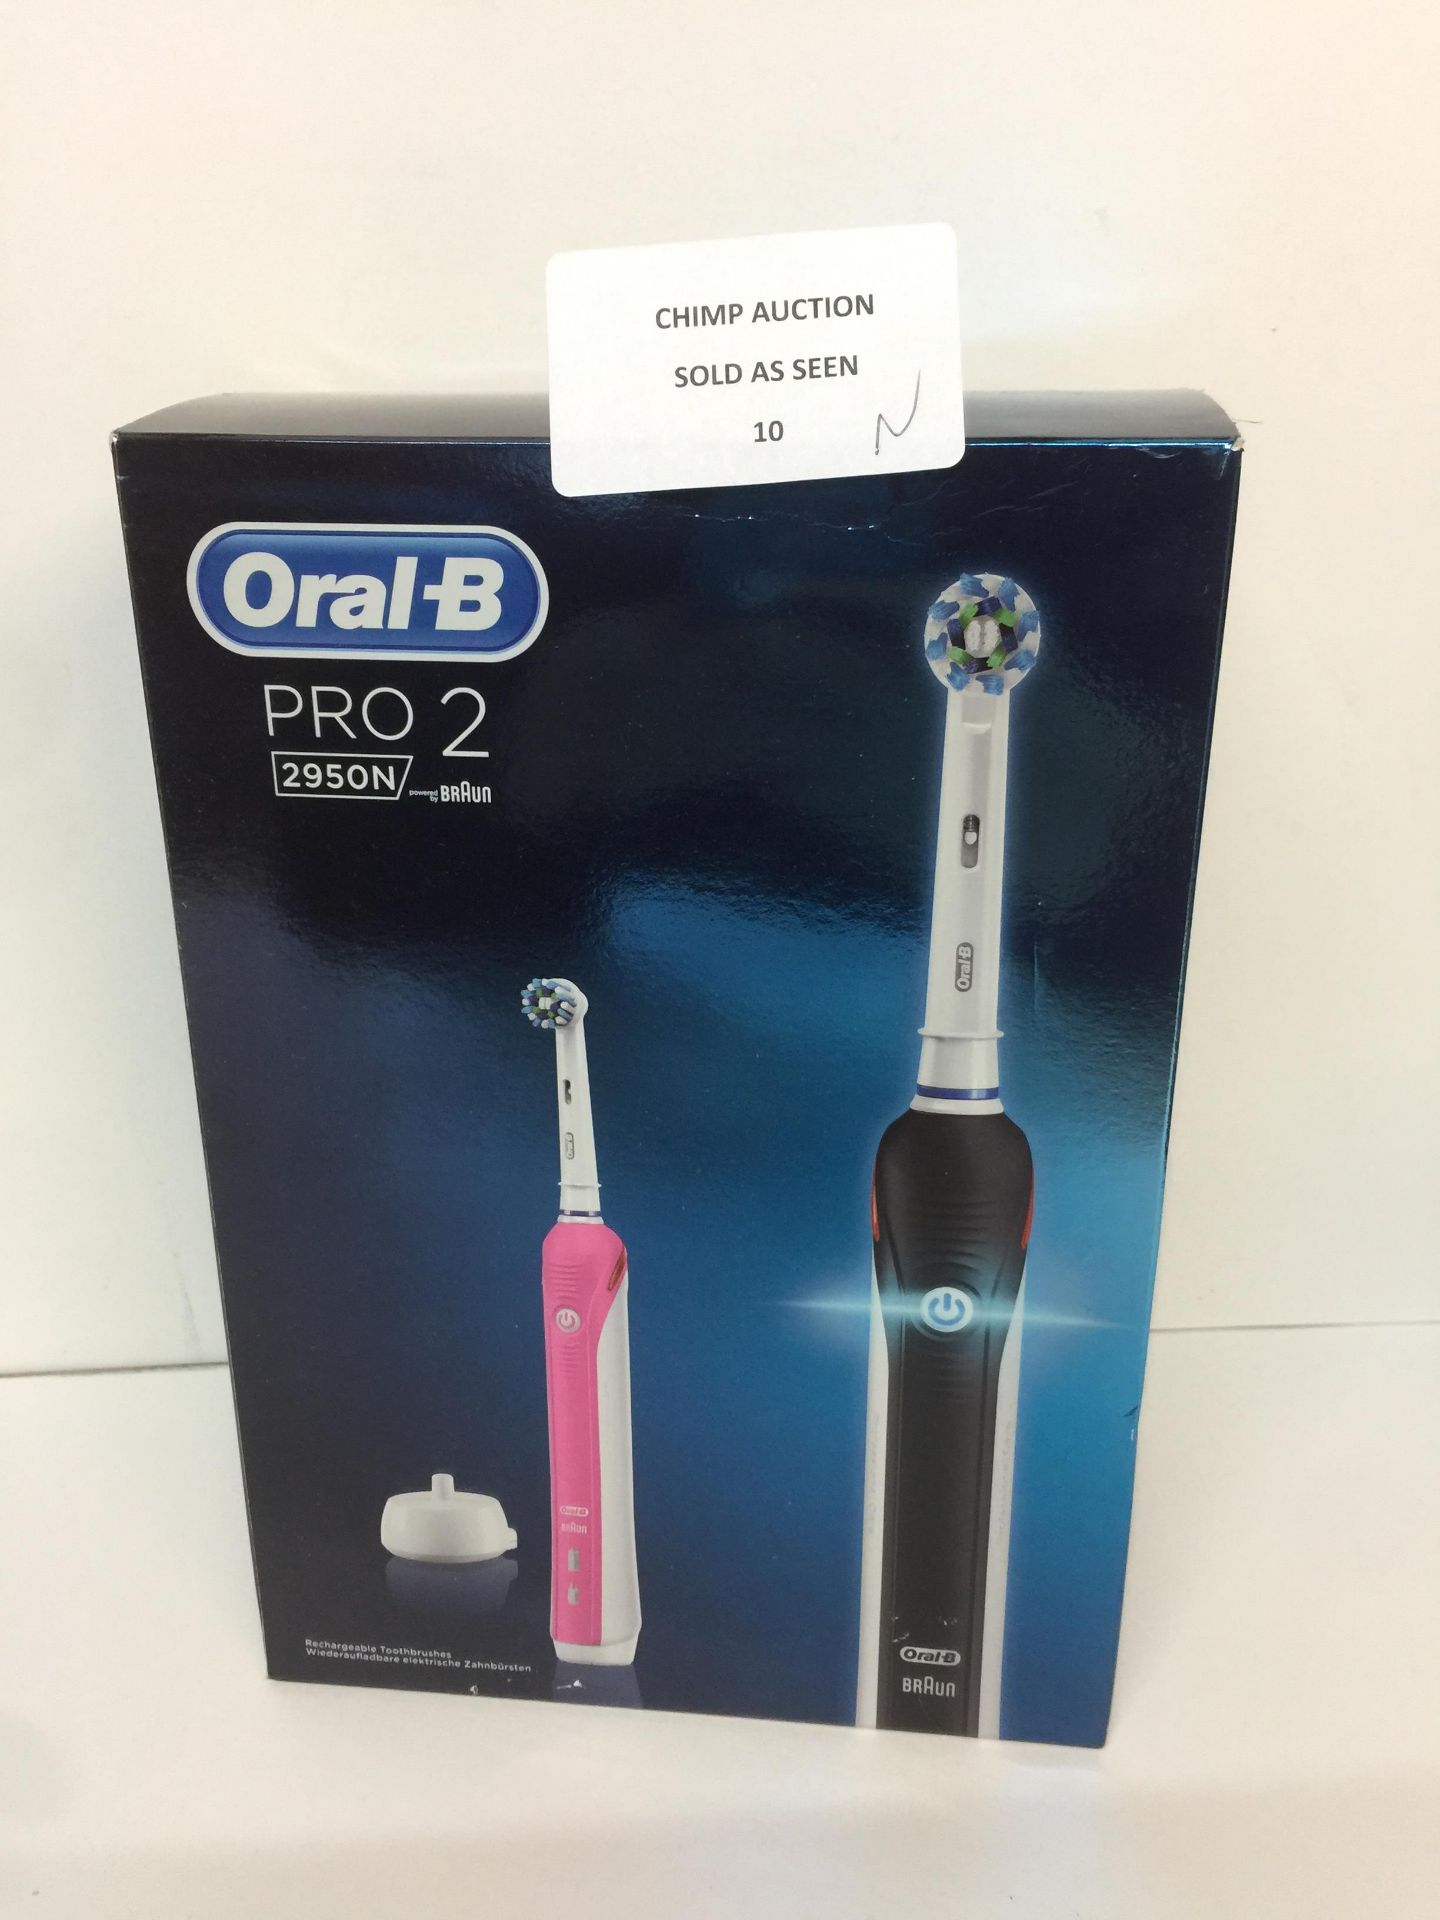 BRAND NEW ORAL-B PRO 2 2950 TWIN EDITION ELECTRIC TOOTHBRUSH RRP £139.99